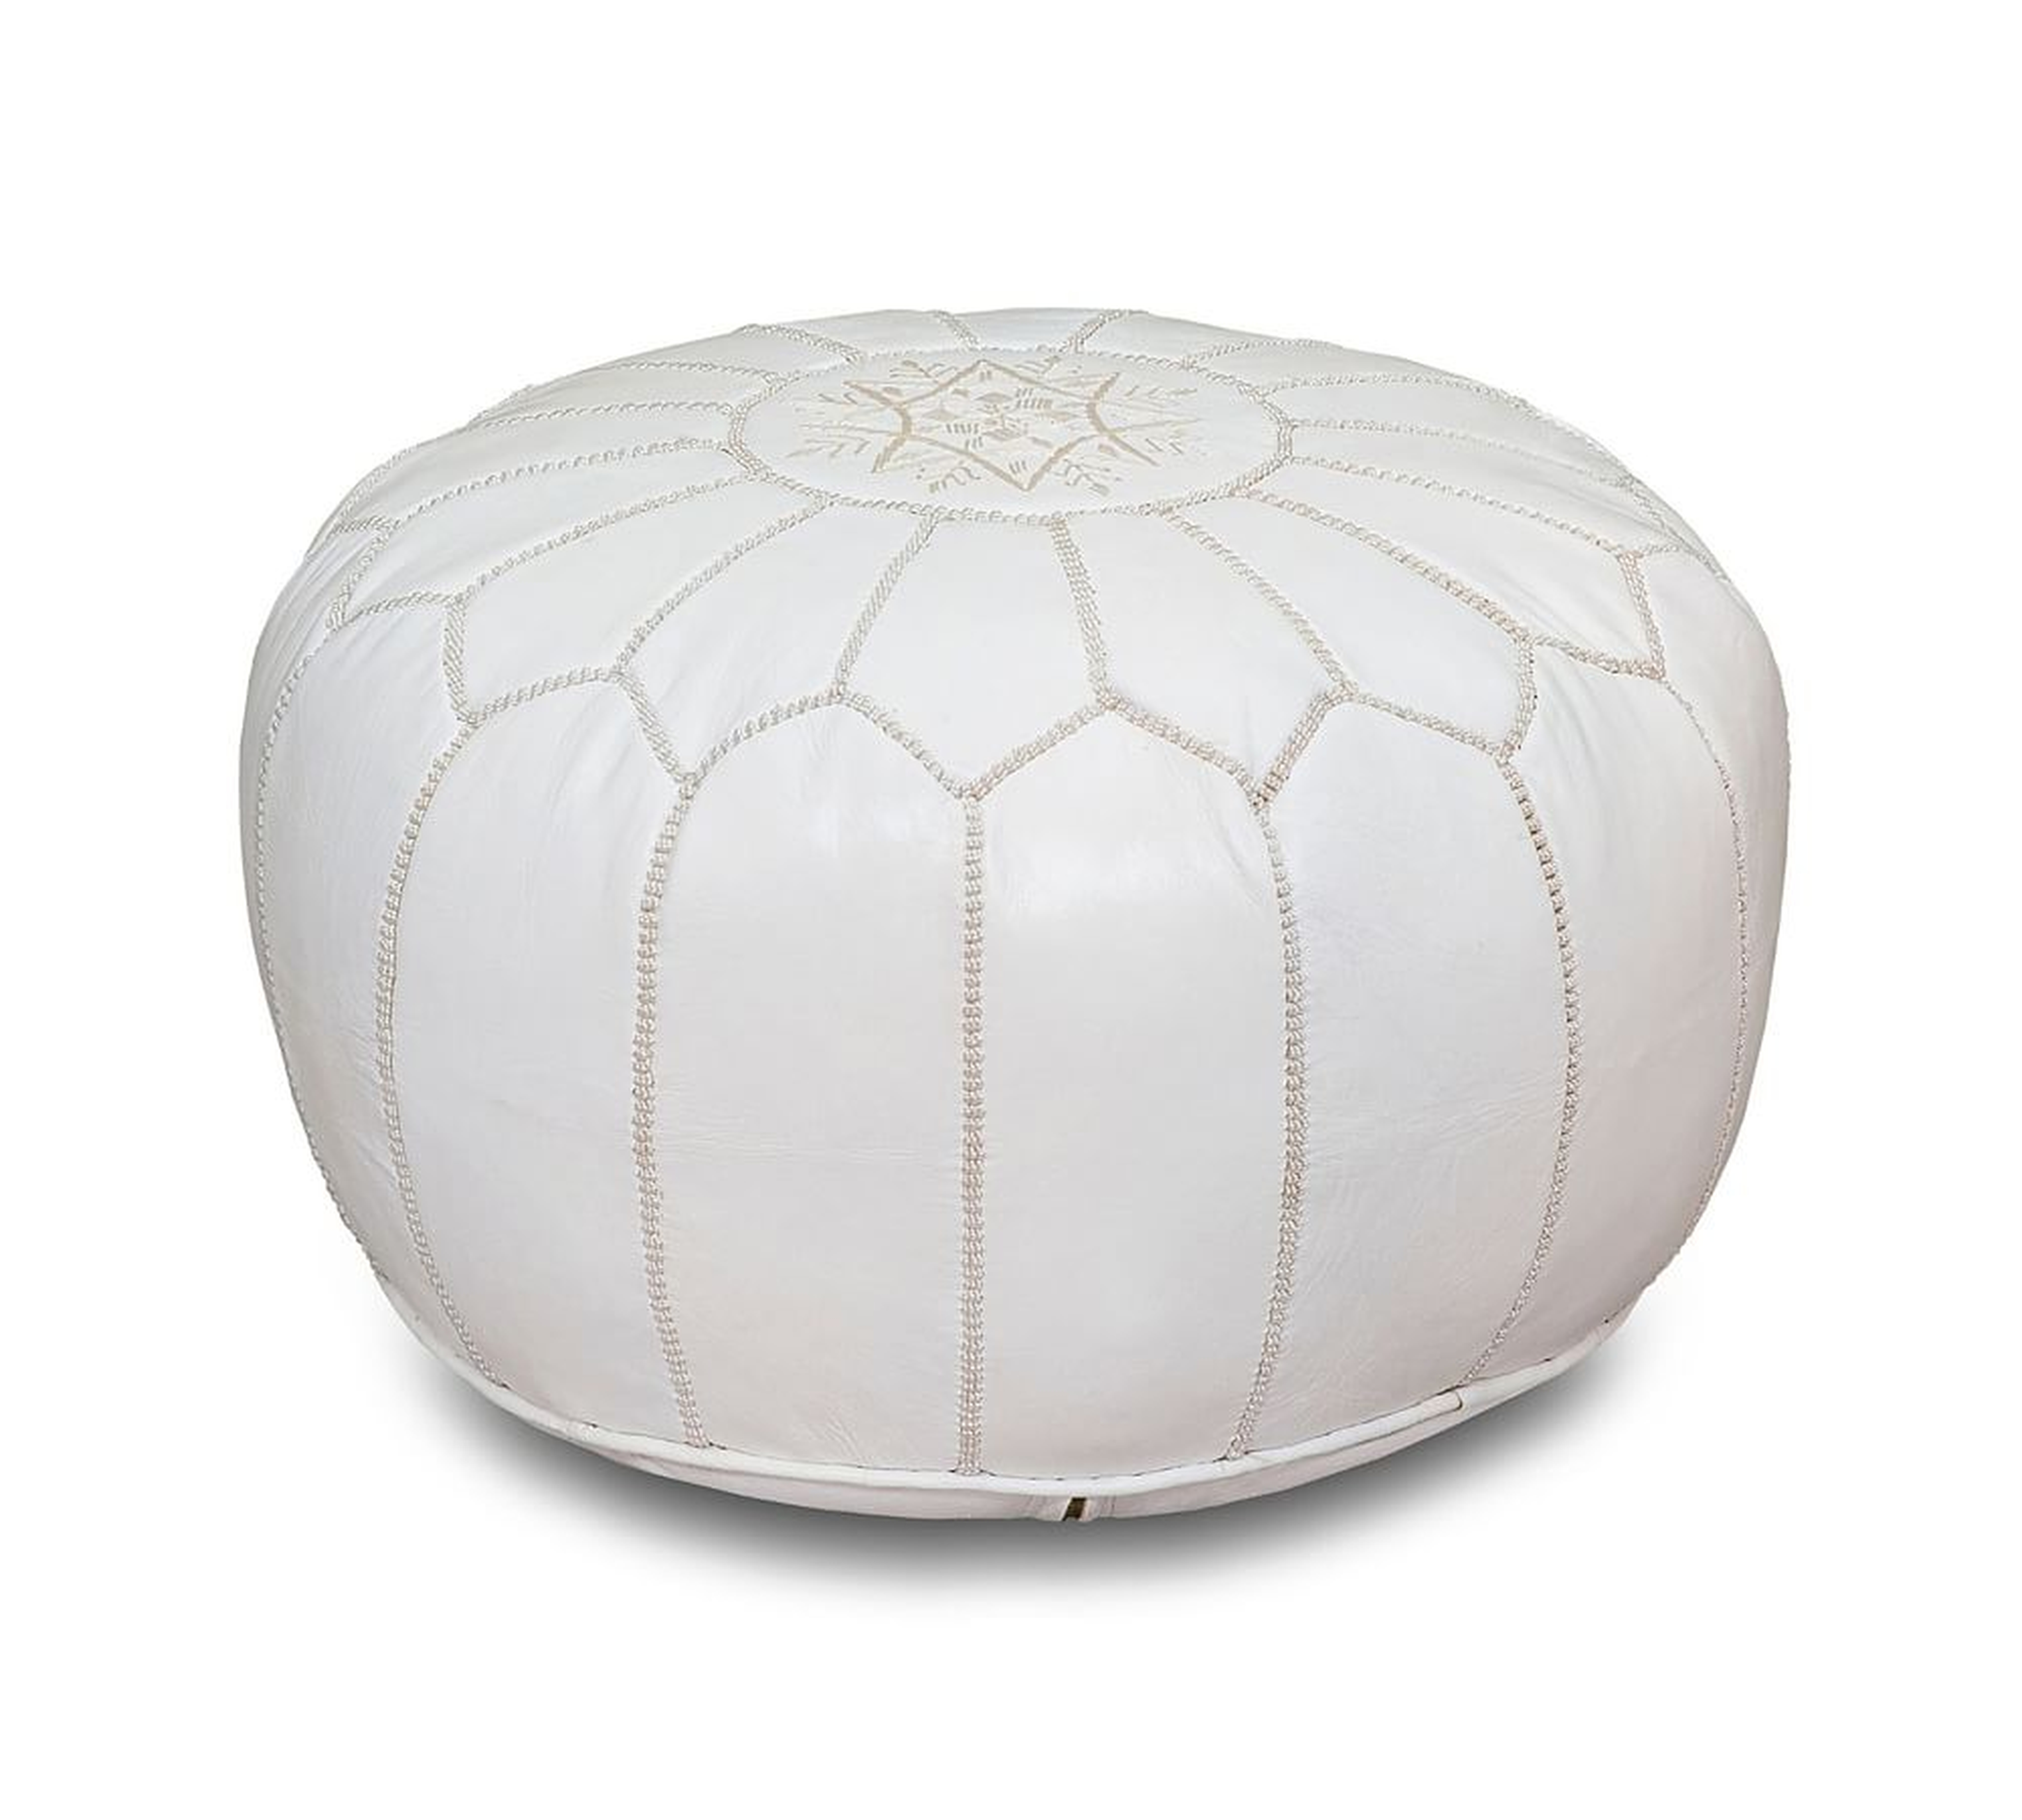 Nadia Moroccan Leather Pouf, White - Pottery Barn